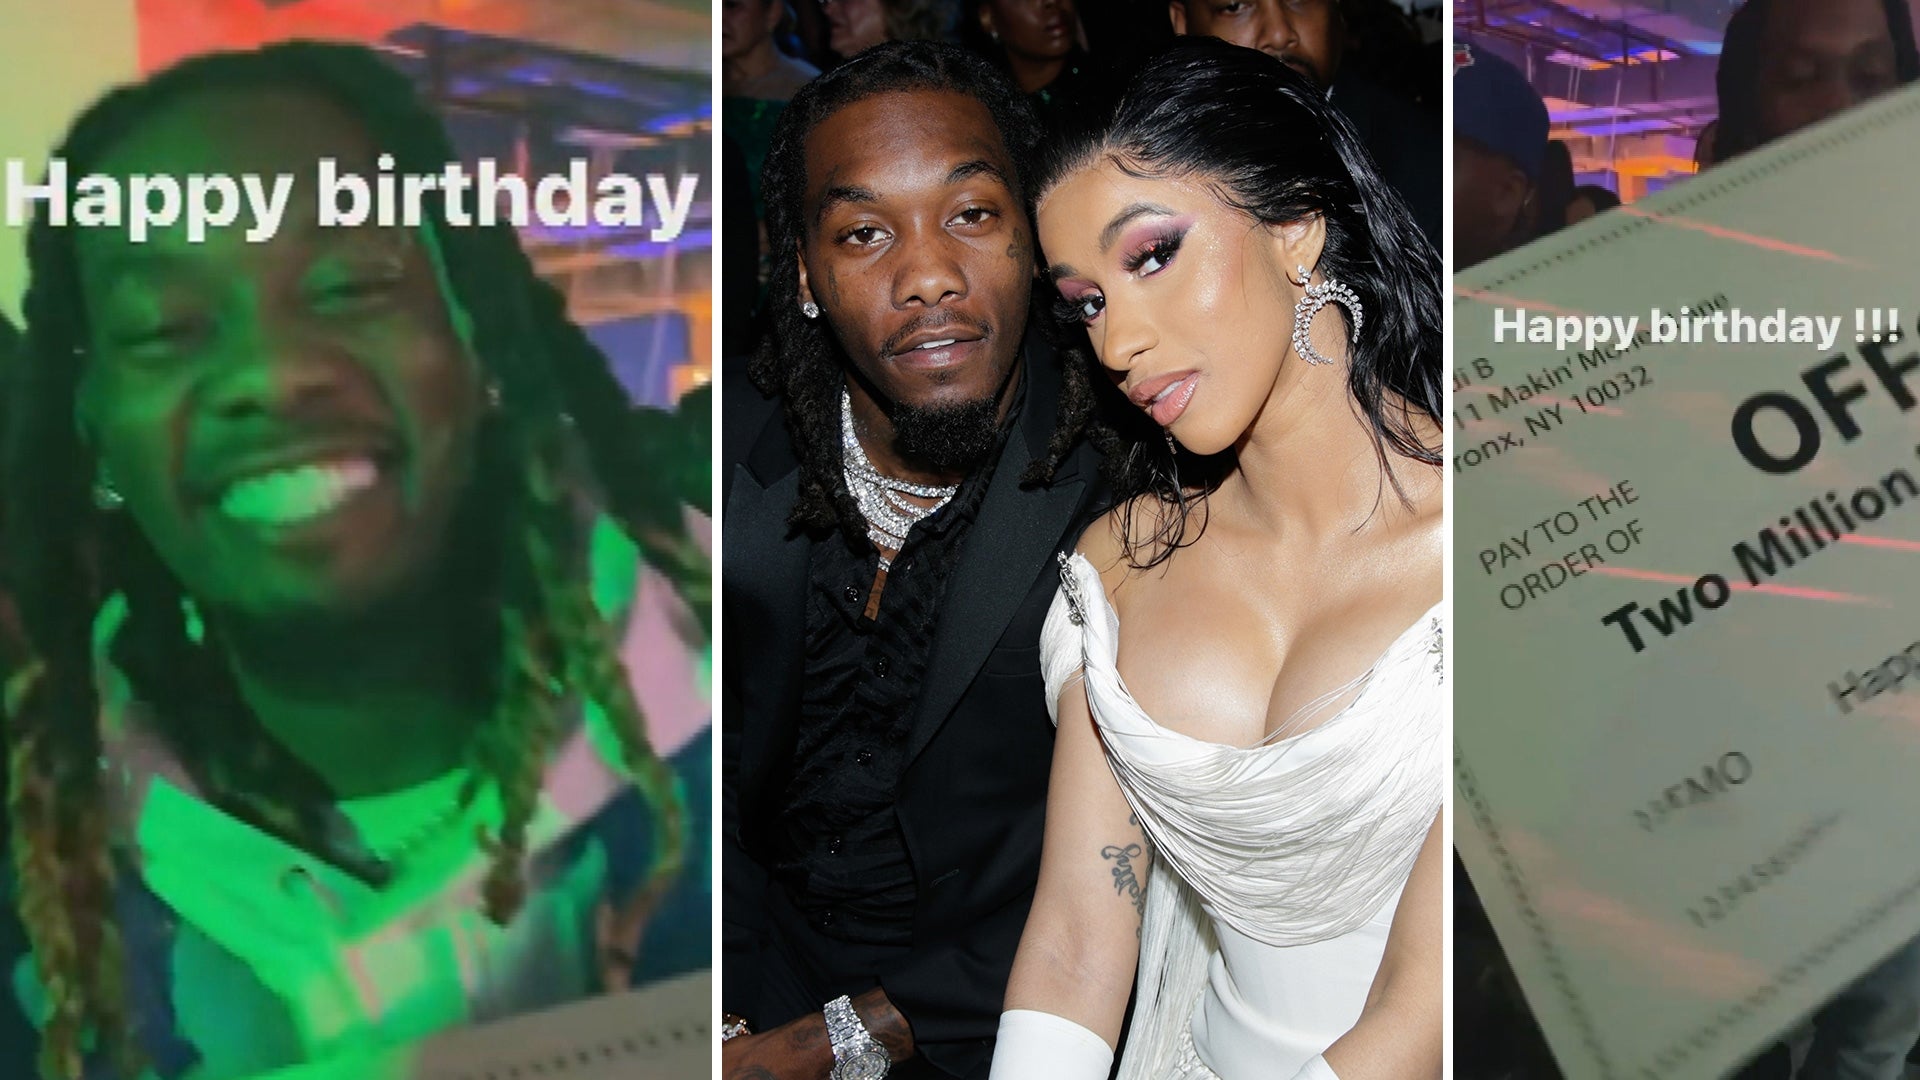 Cardi B Showered in Roses & Chanel Bags From Offset For Valentine's Day:  Photo 4705771, Cardi B, Offset Photos